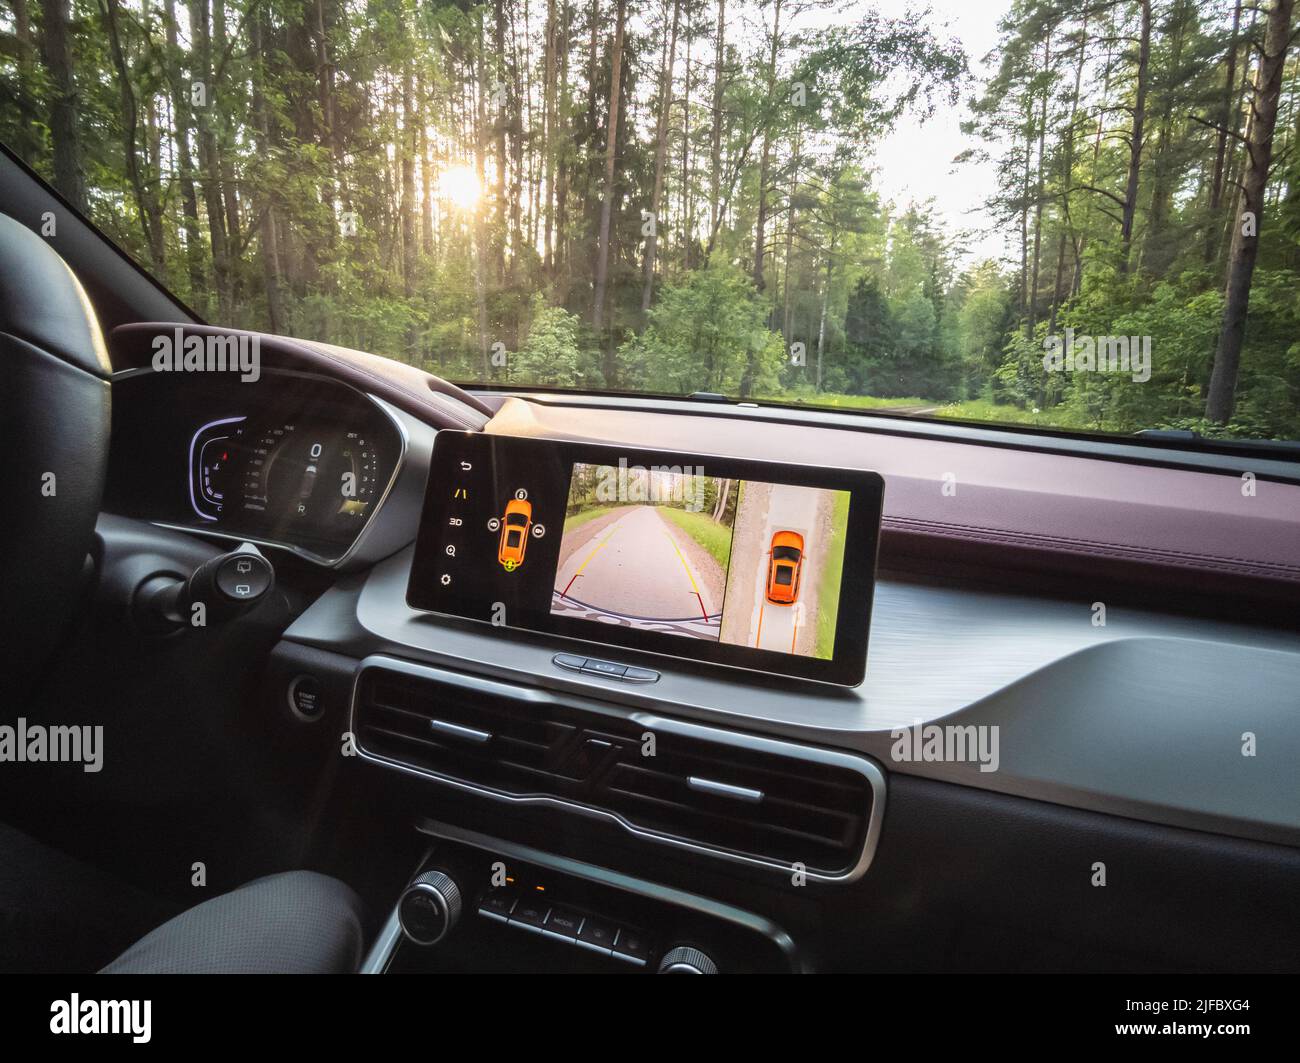 Minsk, Belarus - June 2022: Geely SUV media system screen Geely Coolray car. Stock Photo